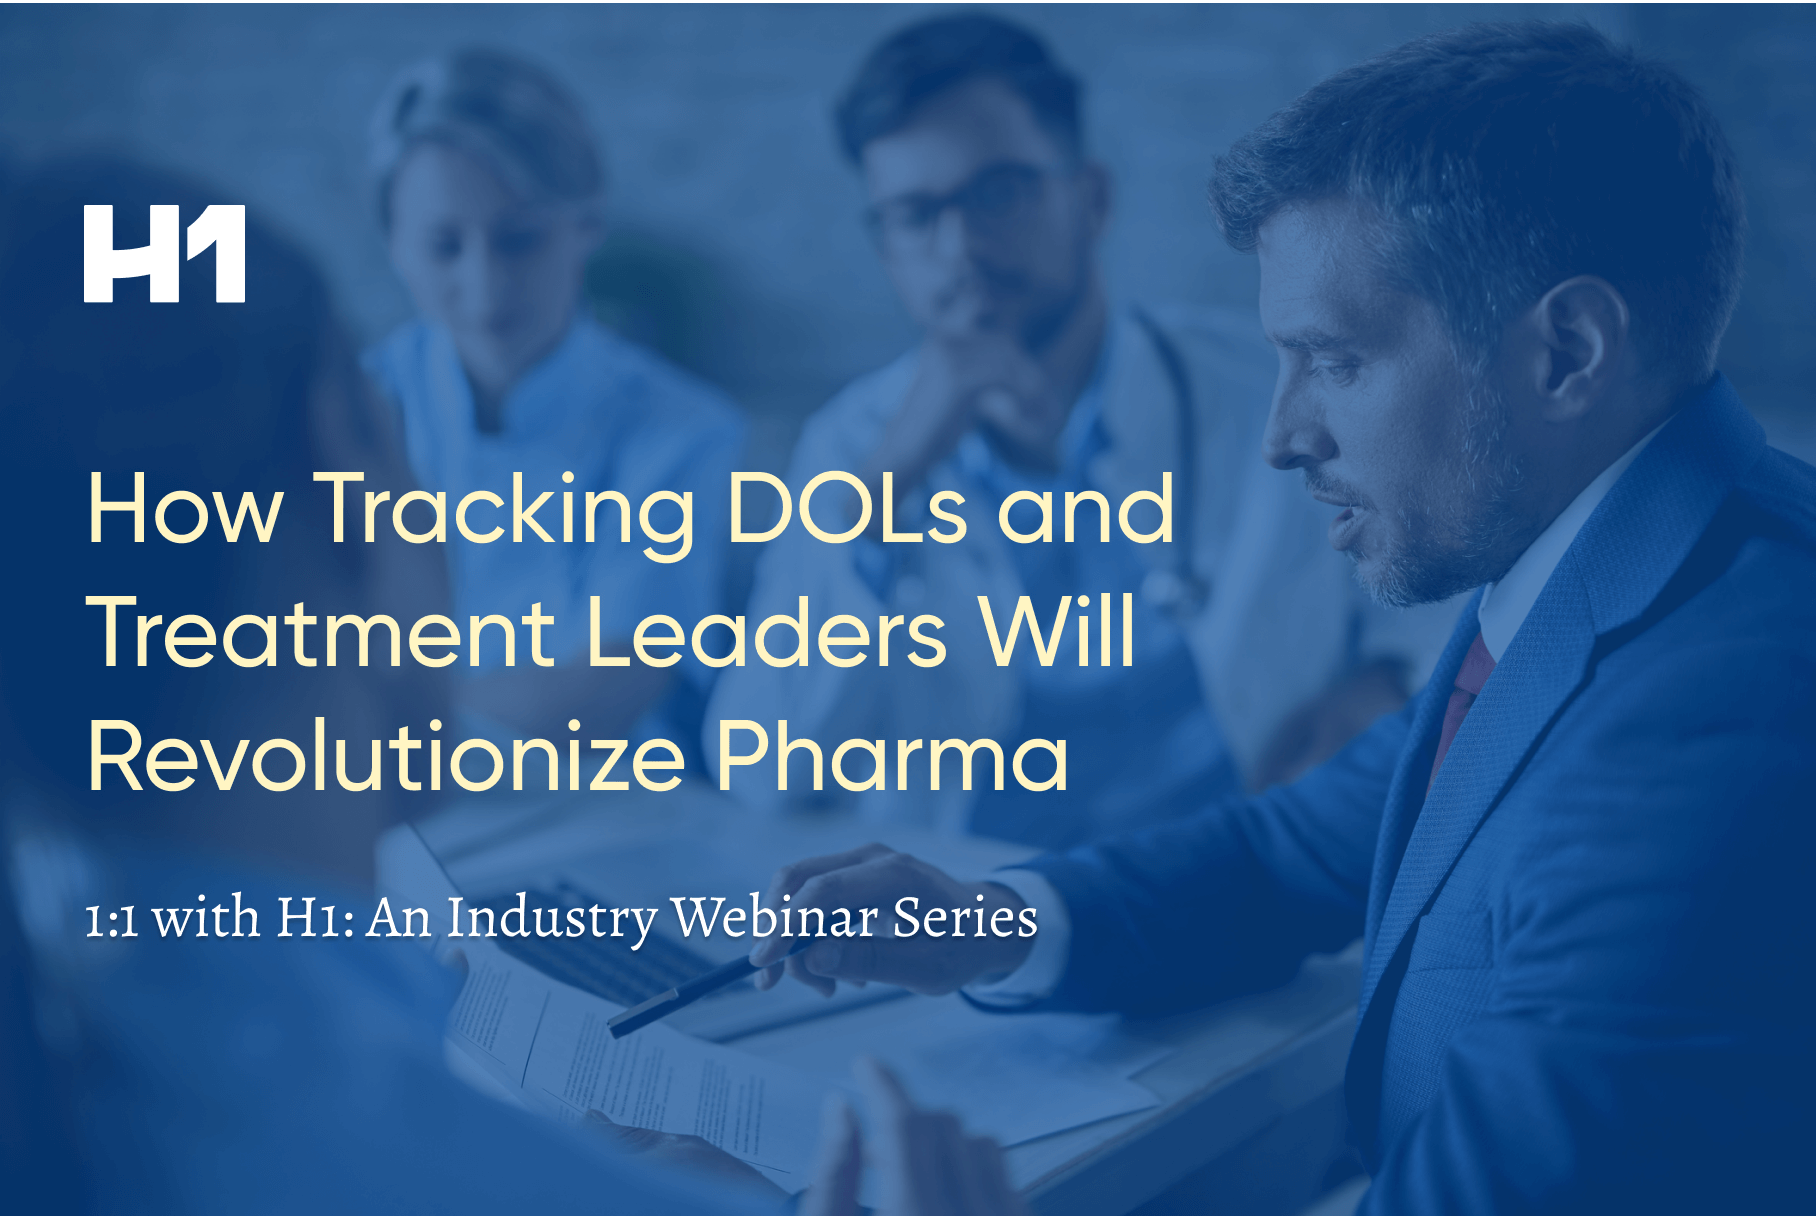 DOL Tracking webinar title and image of business people